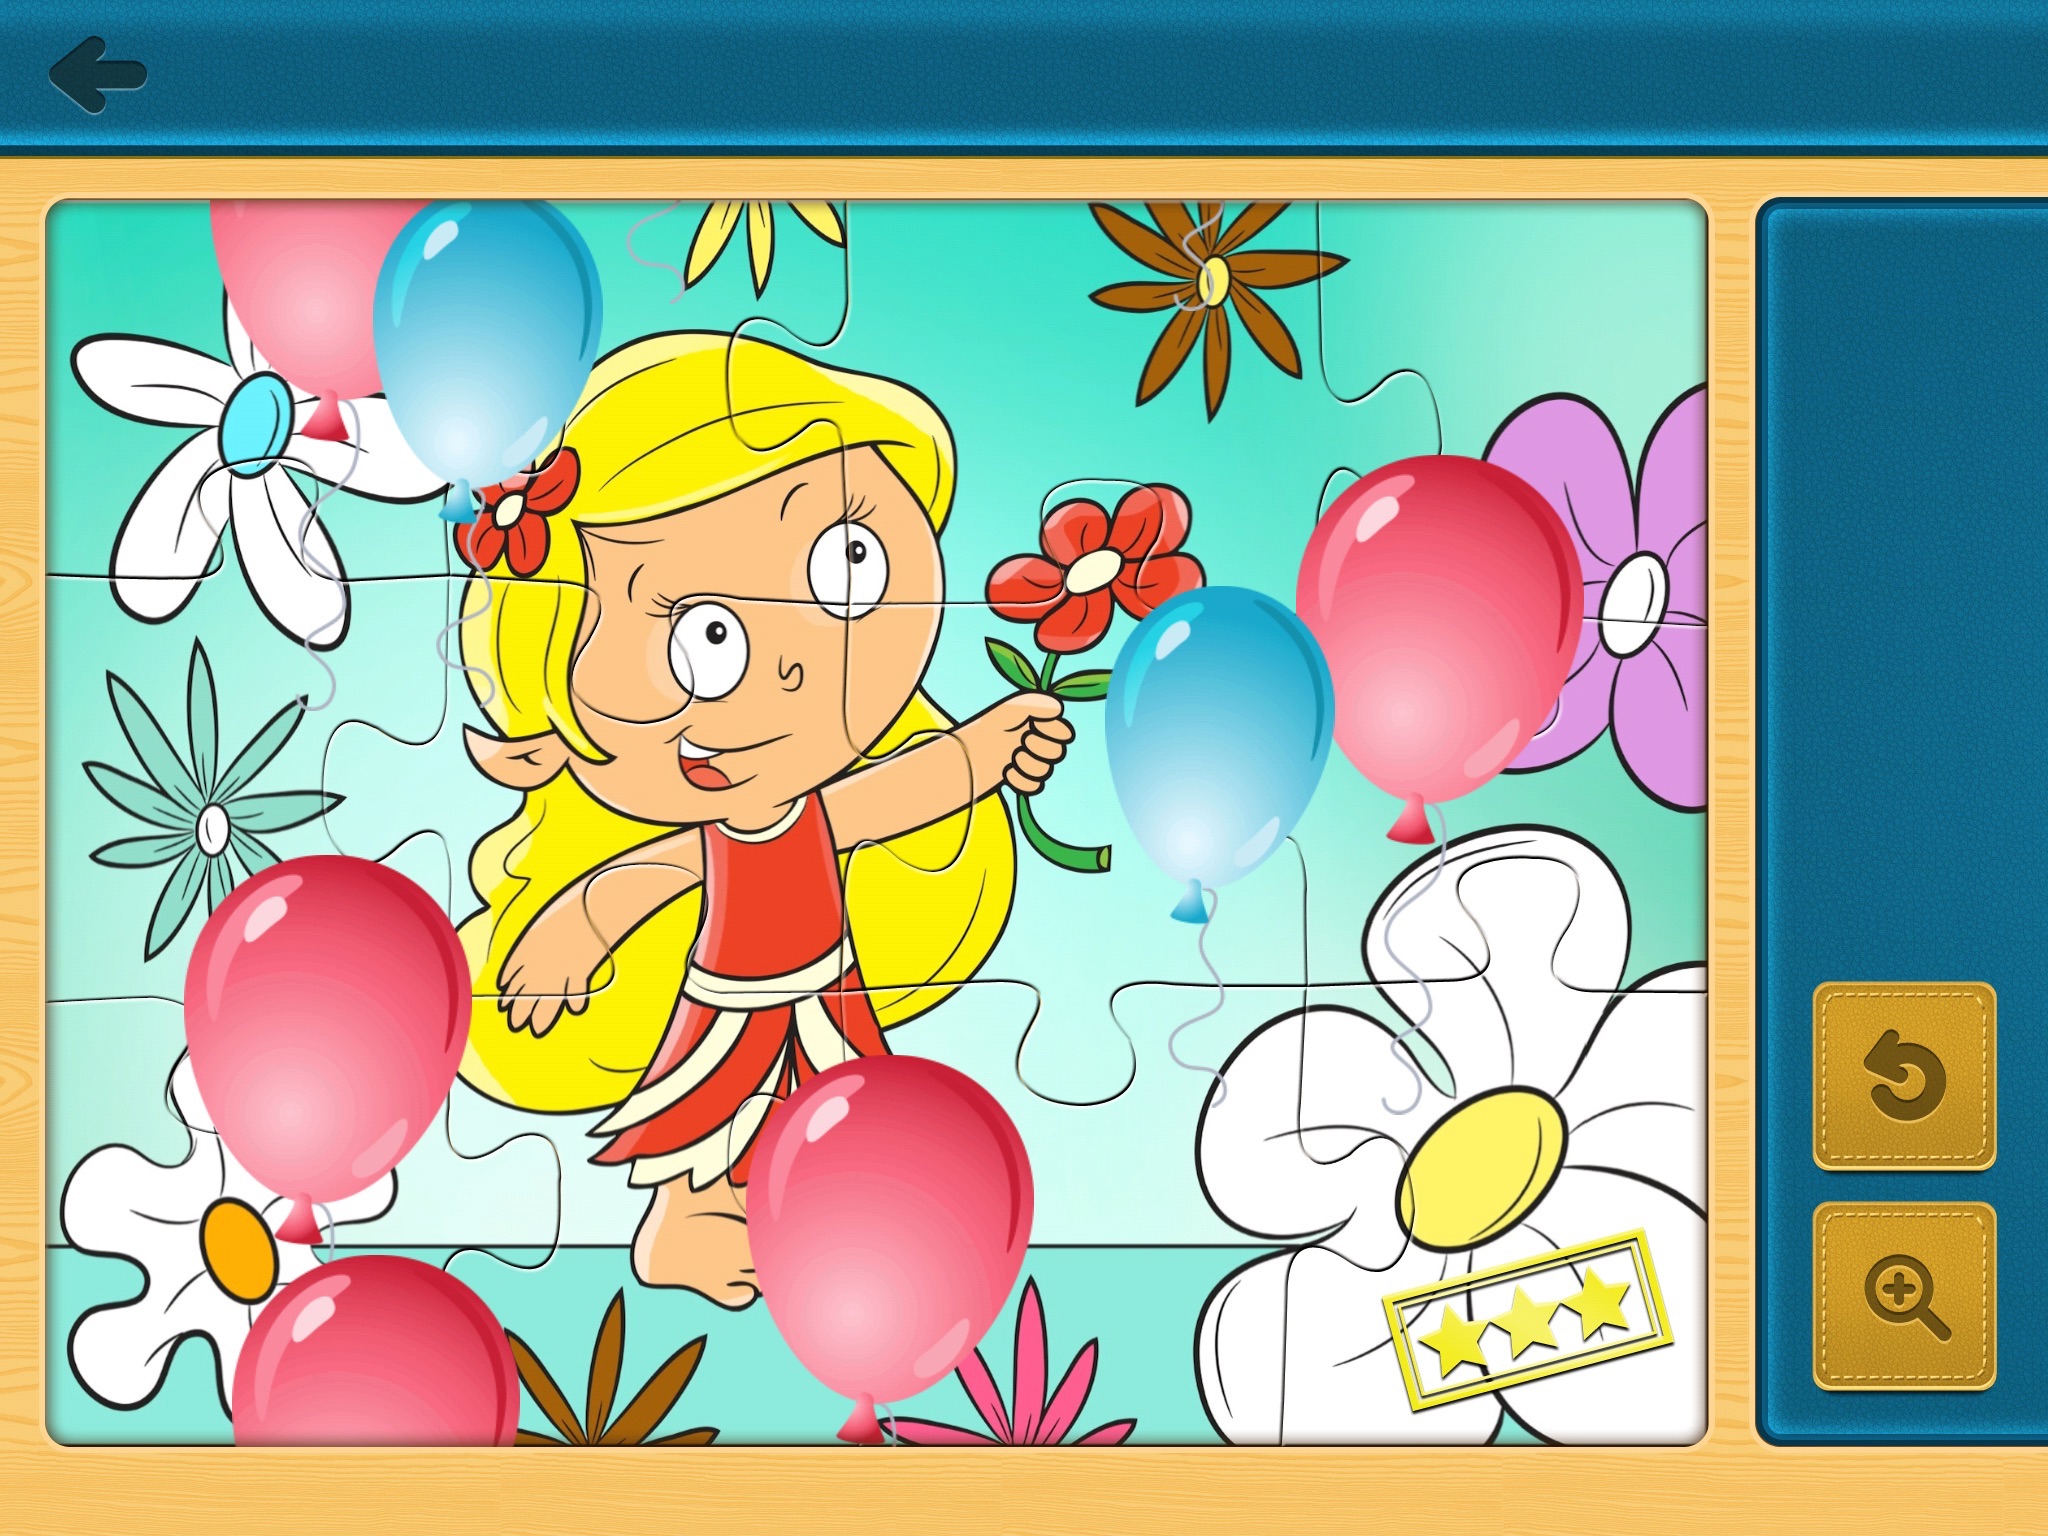 Jigsaw Puzzles (Princess) FREE - Kids Puzzle Learning Games for Preschoolers with Fairies & Princesses screenshot 4